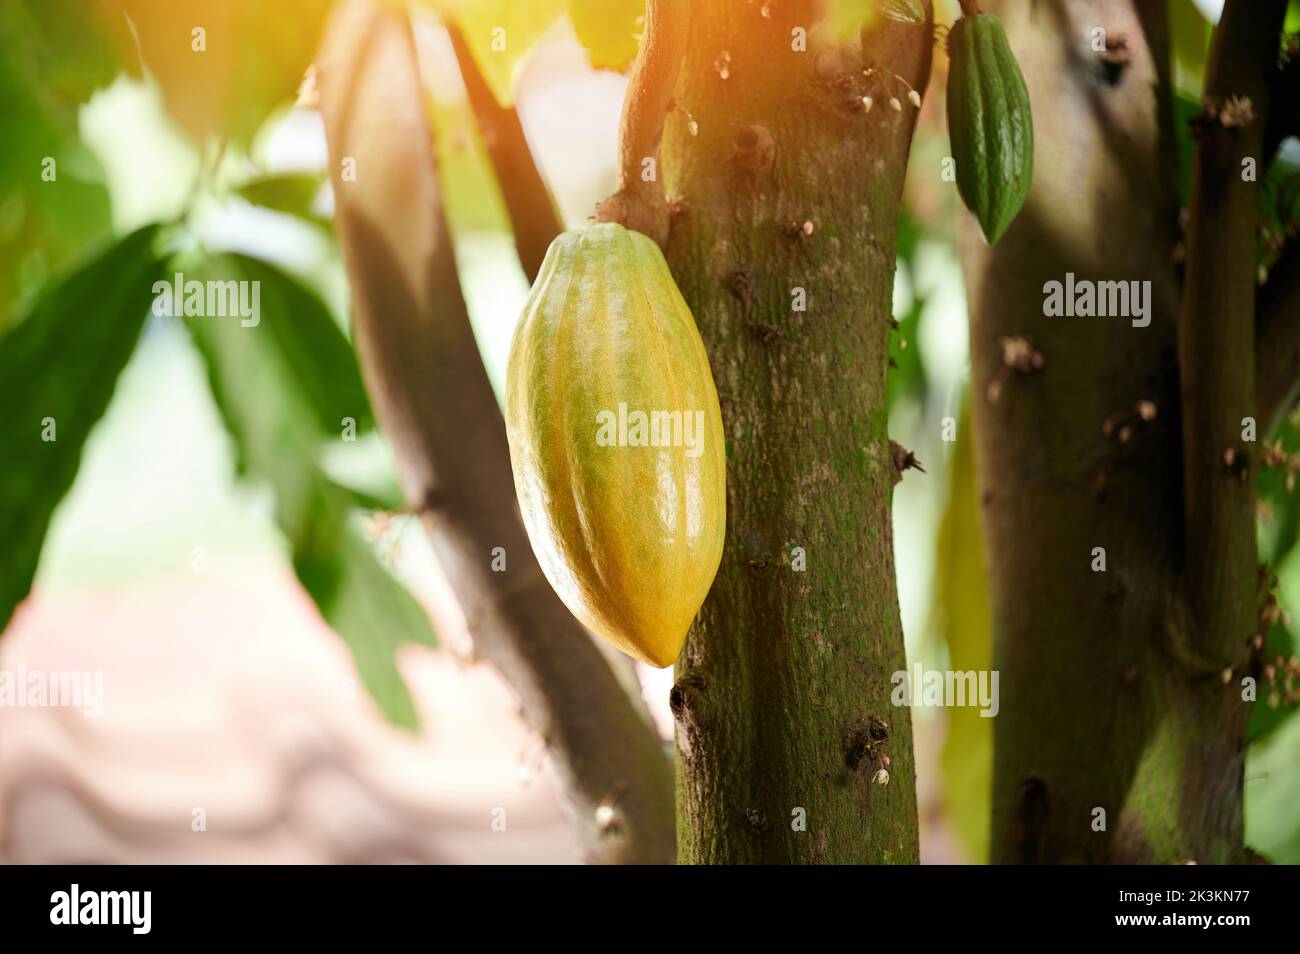 Plantation of cacao pods hang on tree close up view in sunny bright day Stock Photo